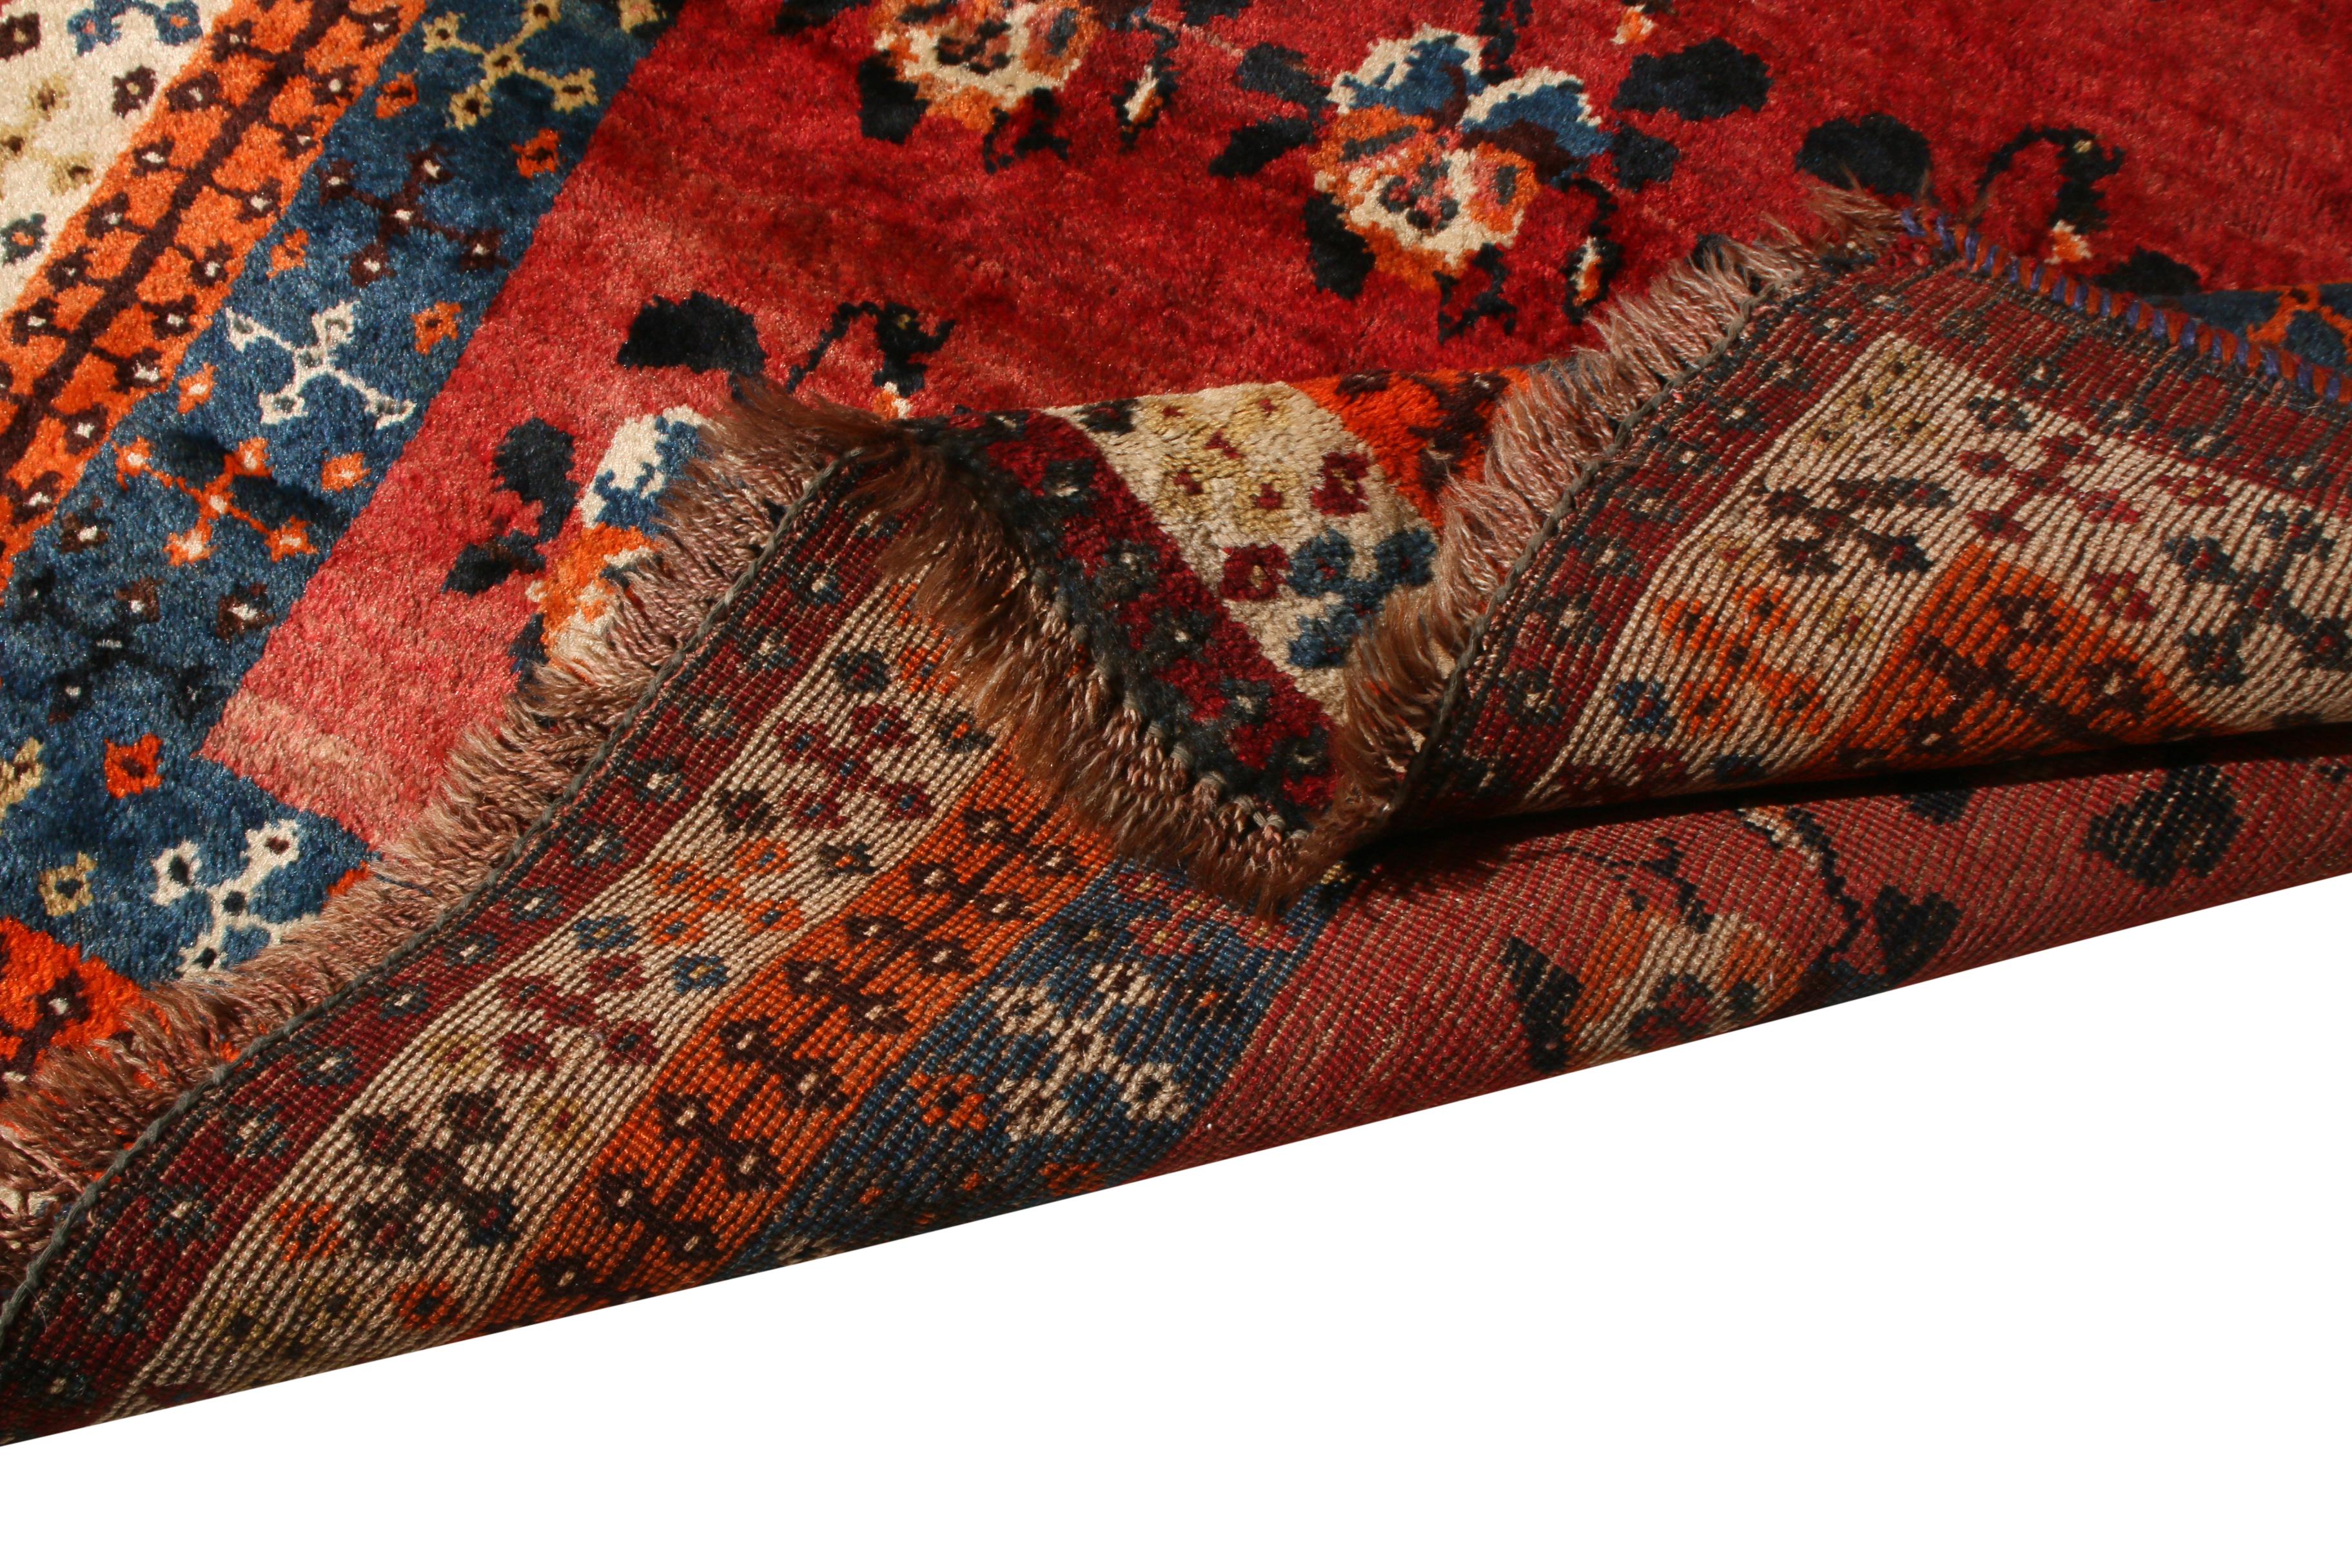 Hand-Knotted 1950s Midcentury Gabbeh Rug Red and Beige-Brown Vintage Persian Floral